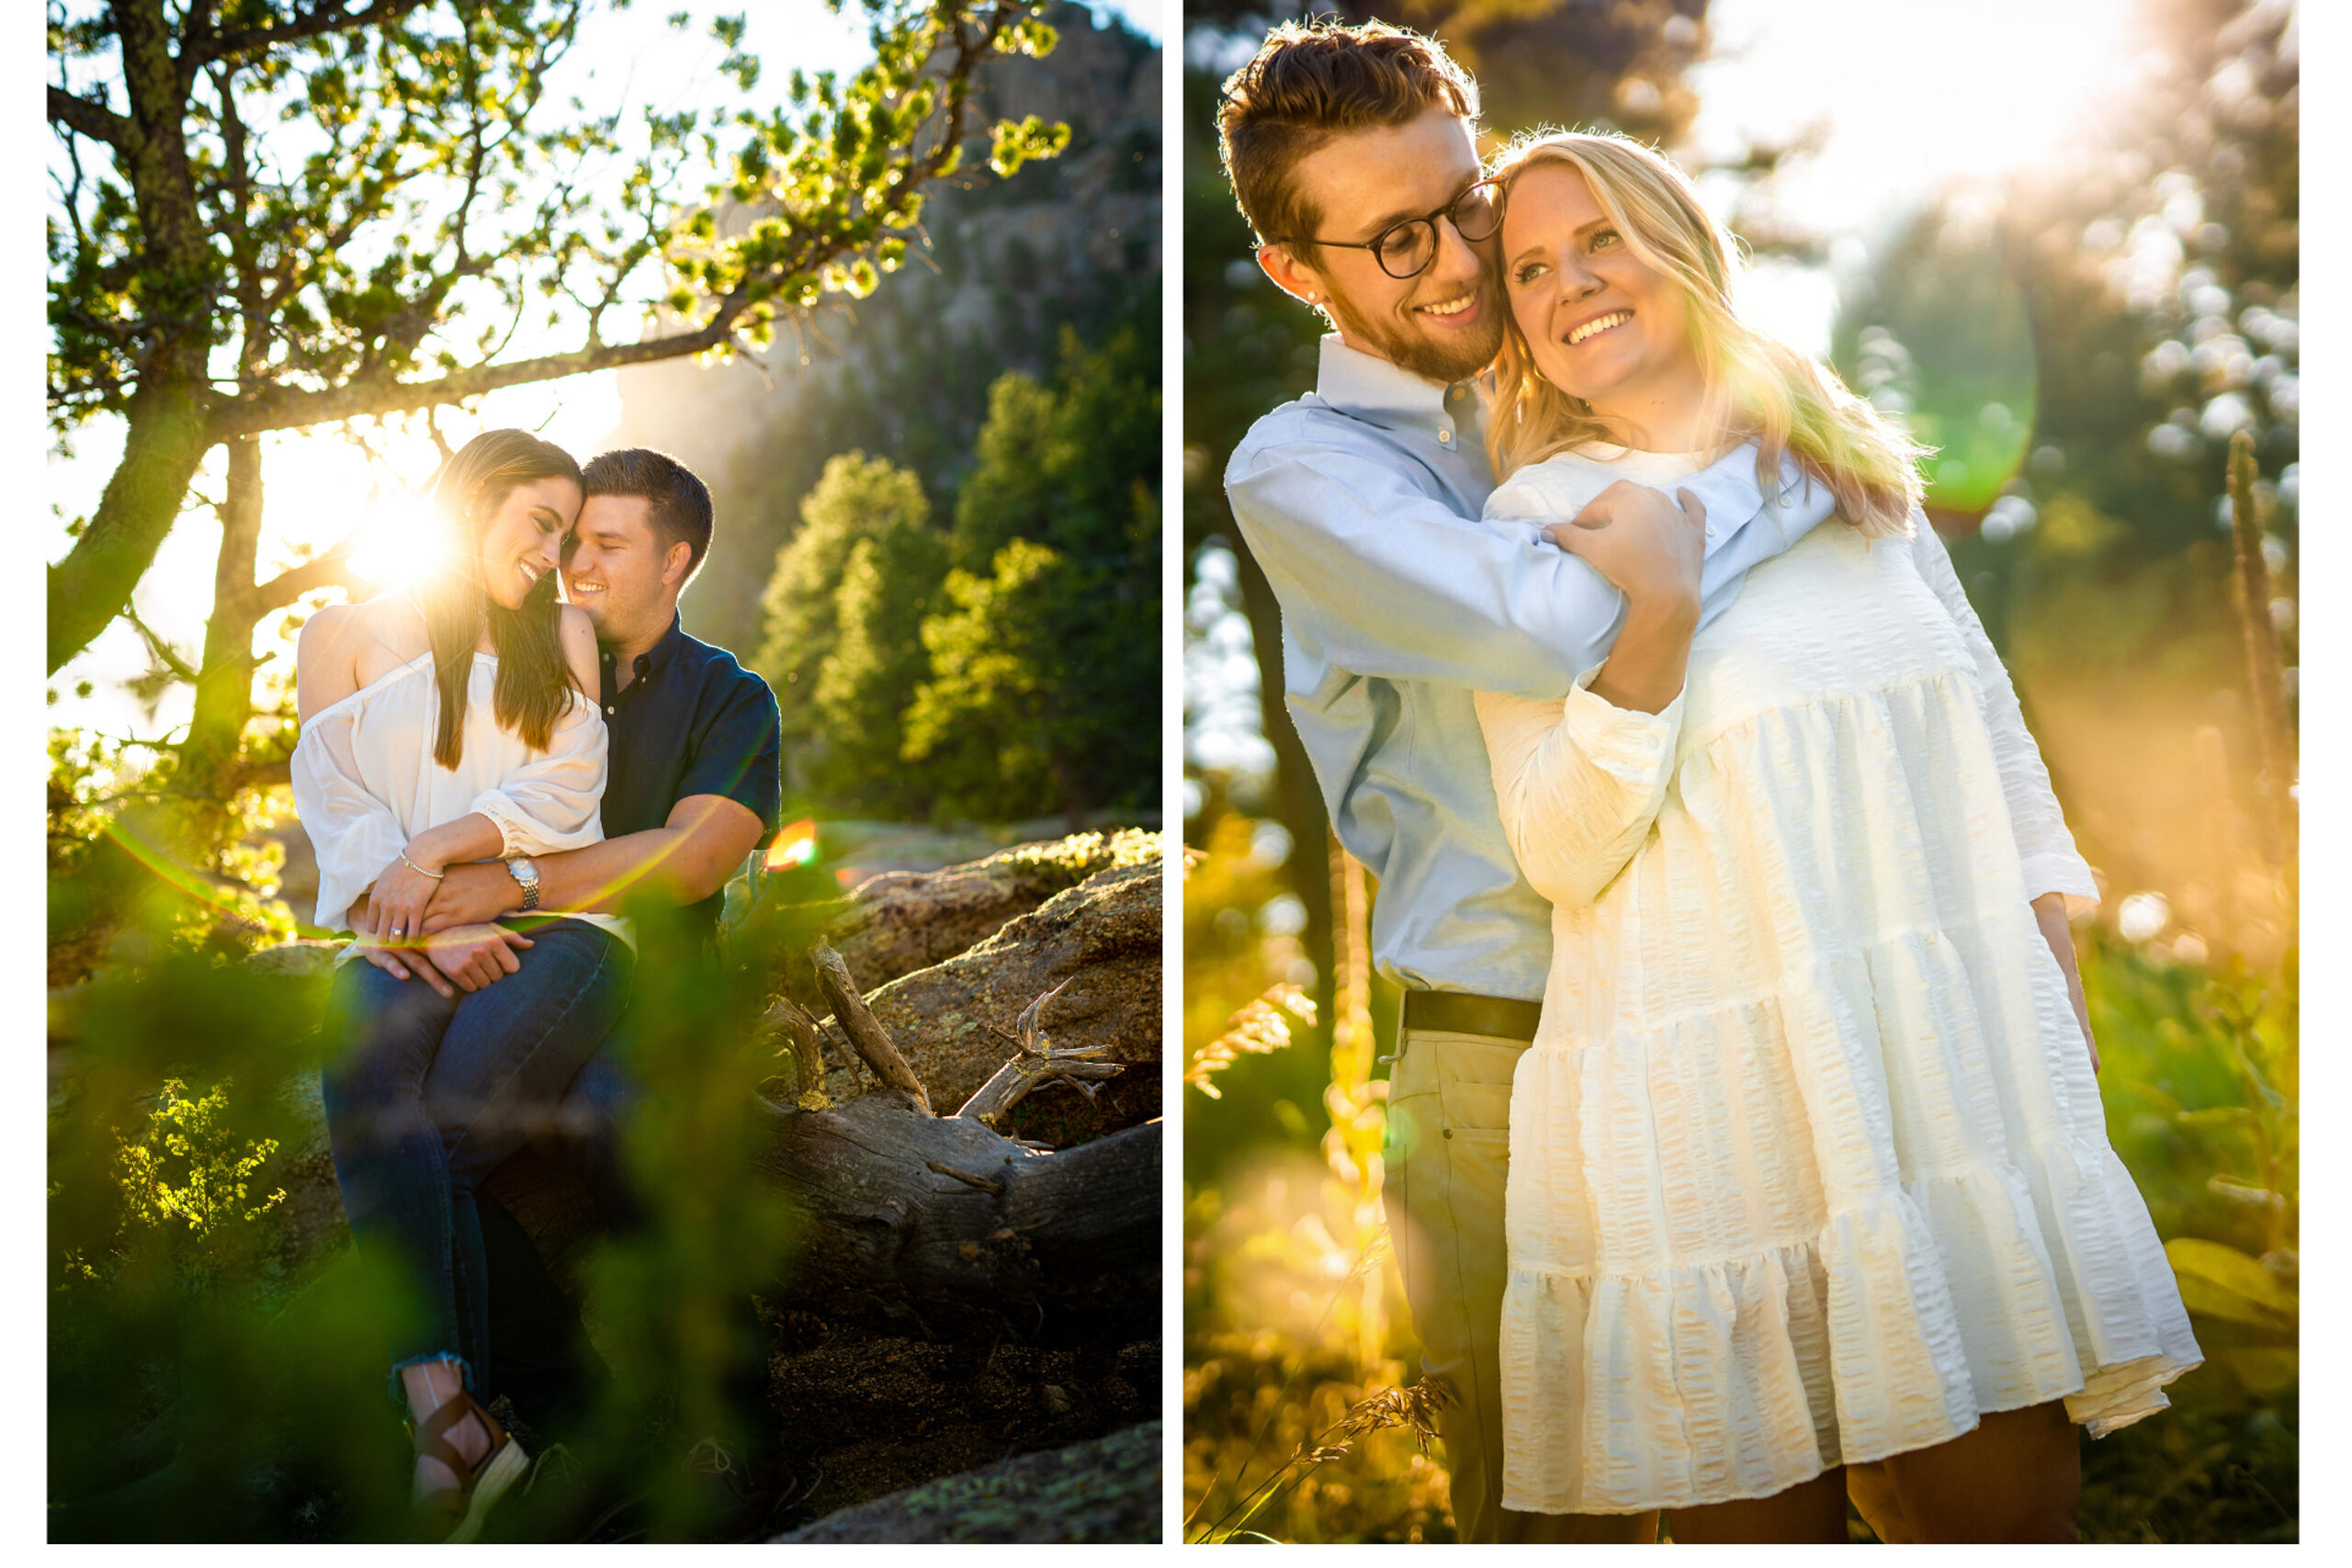 Top 10 Tips What to Wear to Your Engagement Session